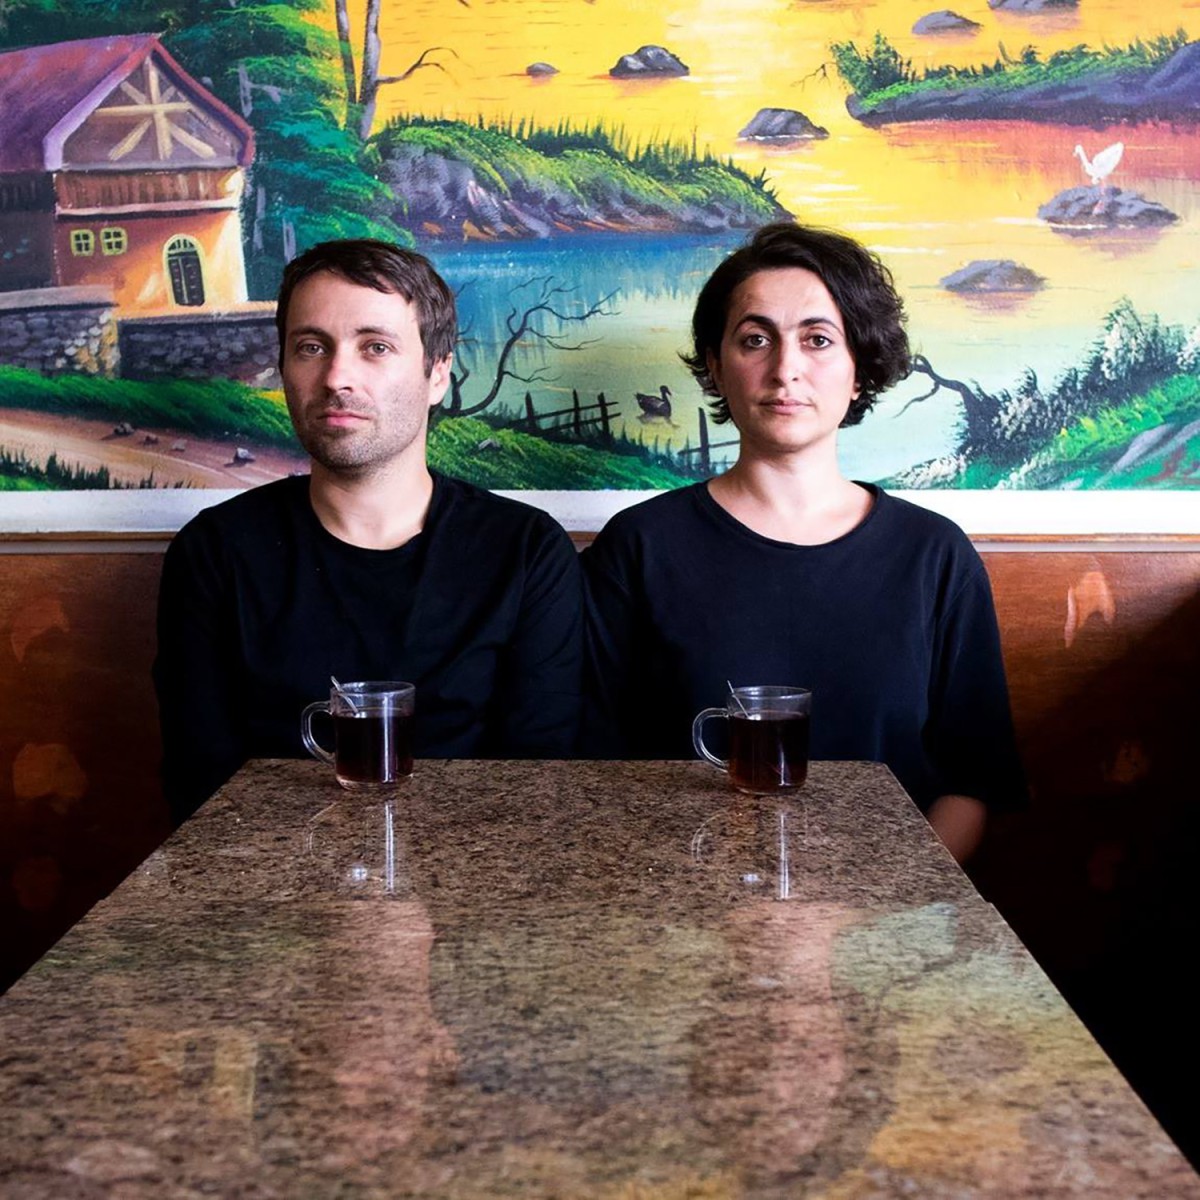 Nuray Demir and Michael Annoff sit next to each other at a table, tea in front of them, a fairy tale wallpaper behind them